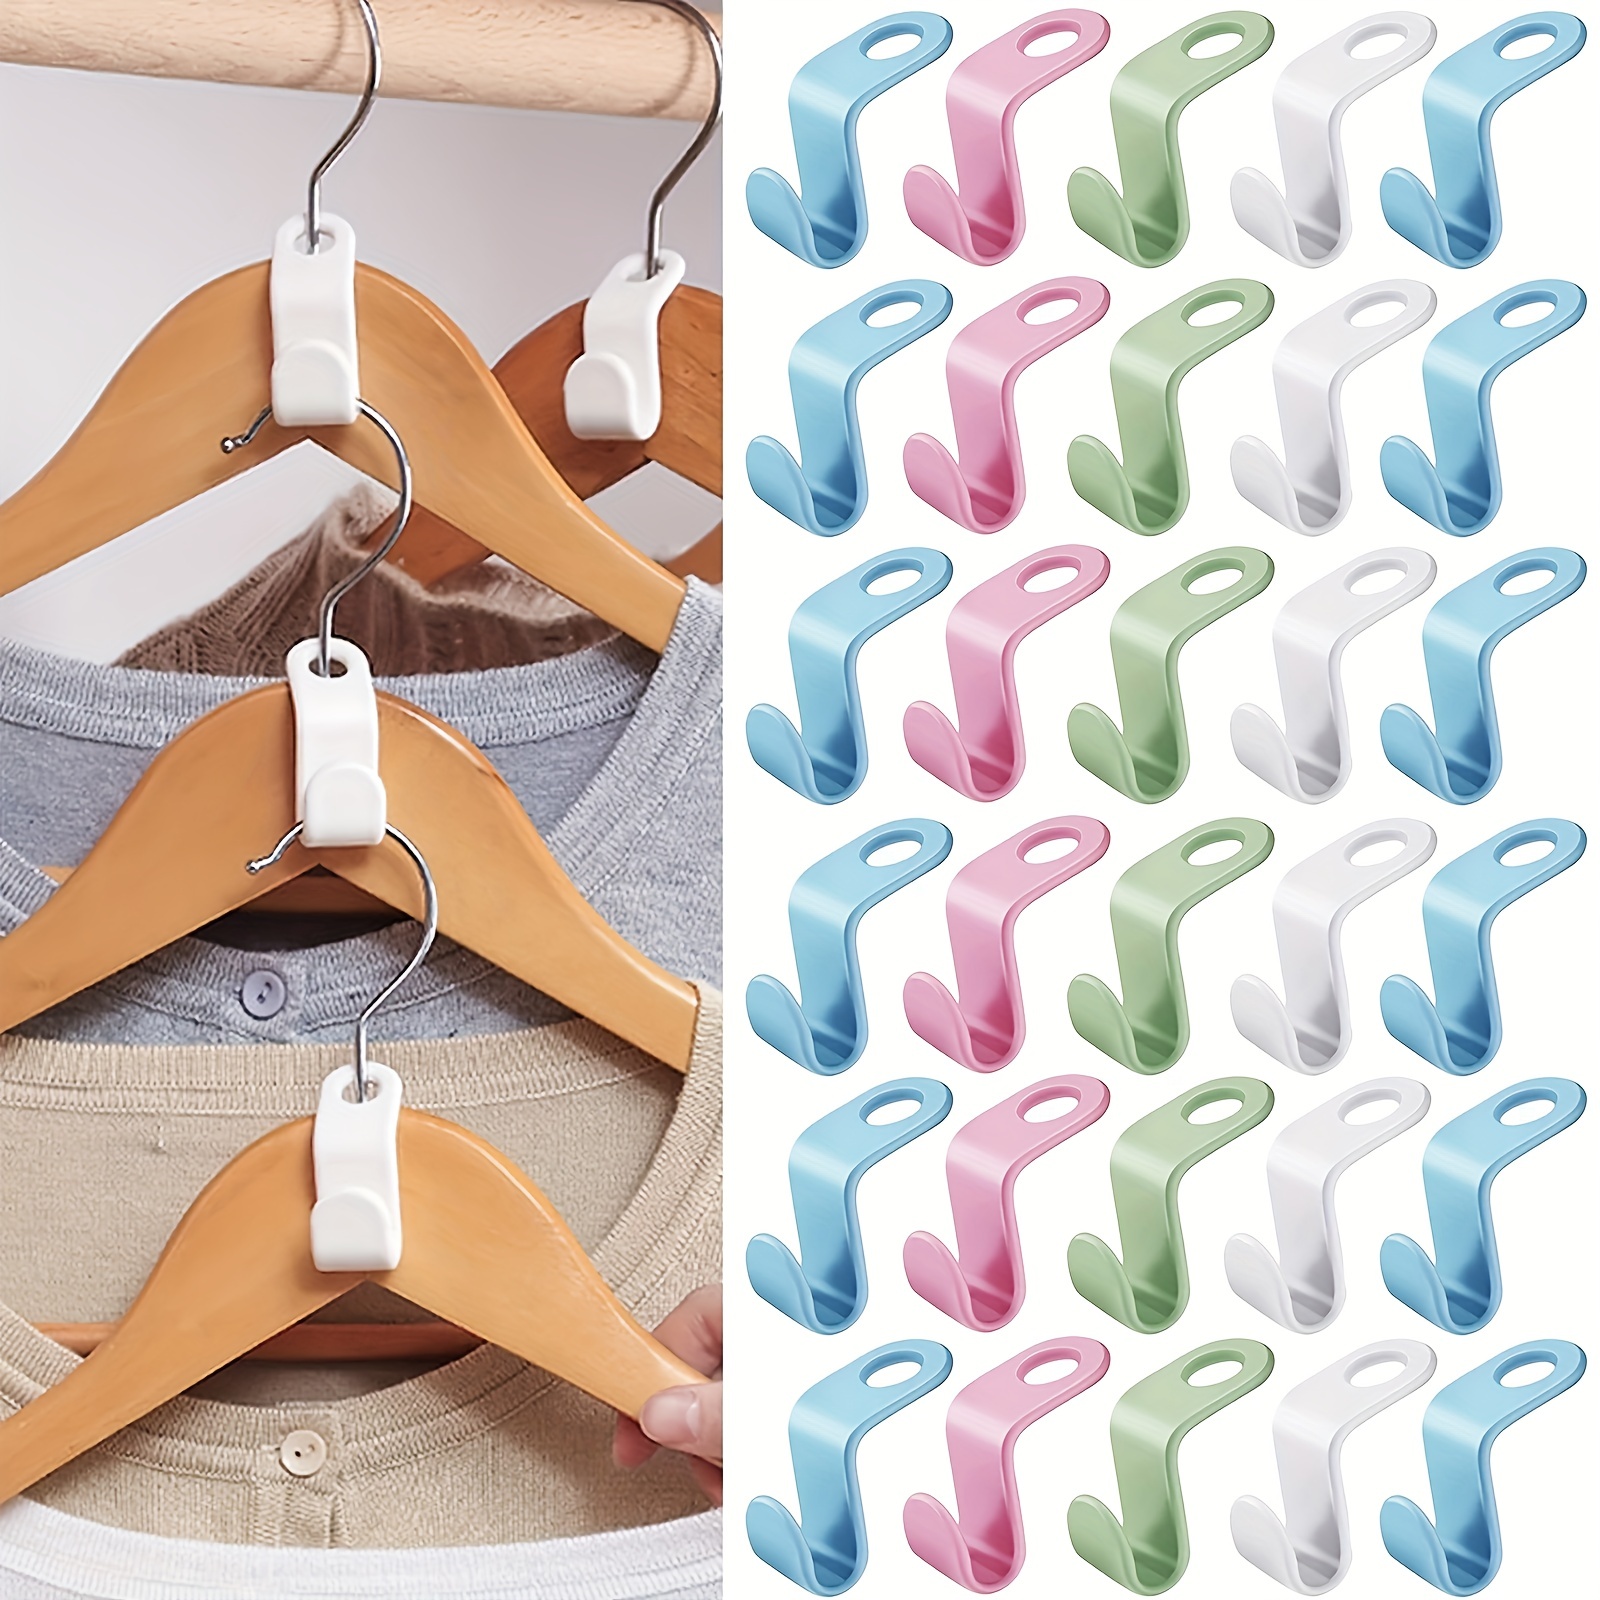 Clothes Hanger Connector Hooks Clothes Matching Cascading - Temu